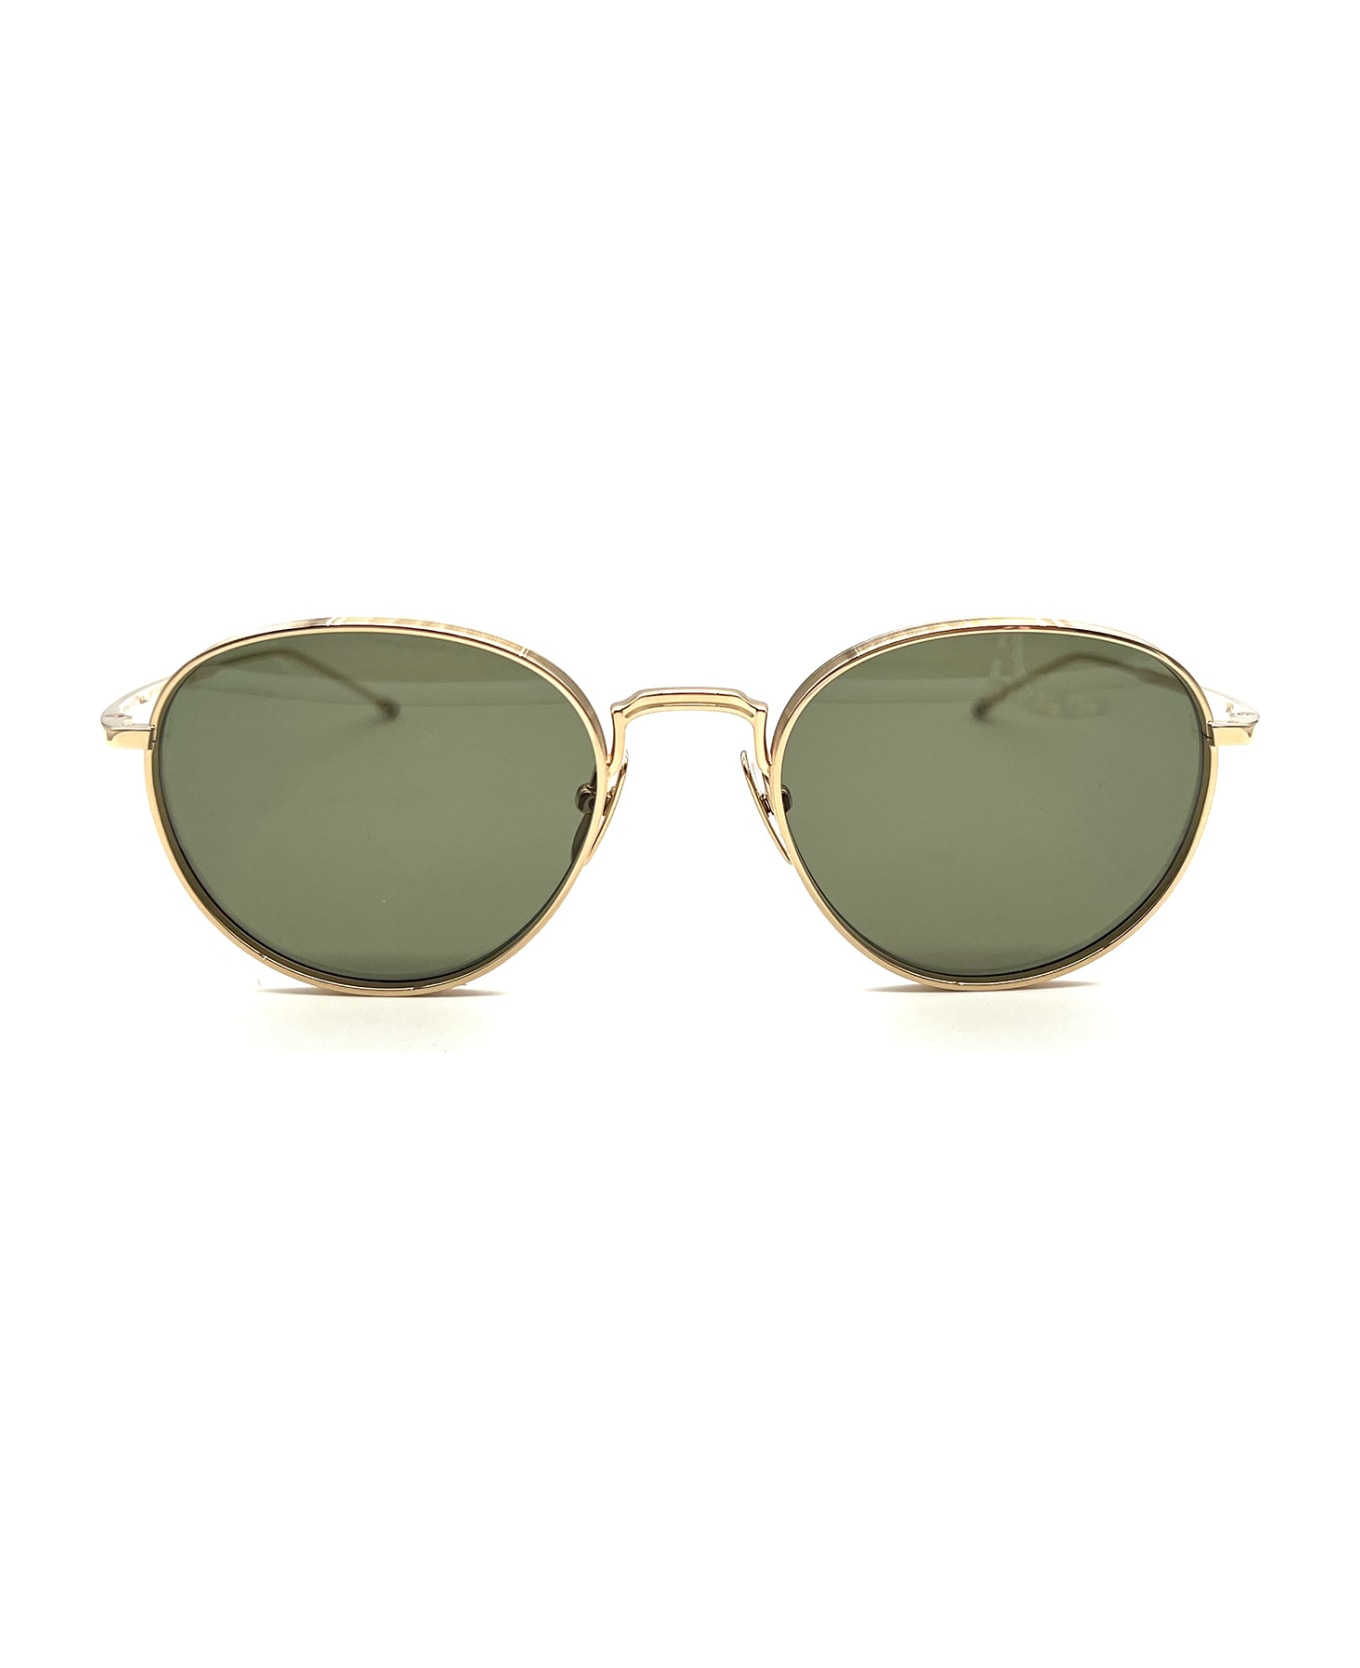 Thom Browne UES119A/G0001 Sunglasses - White Gold サングラス